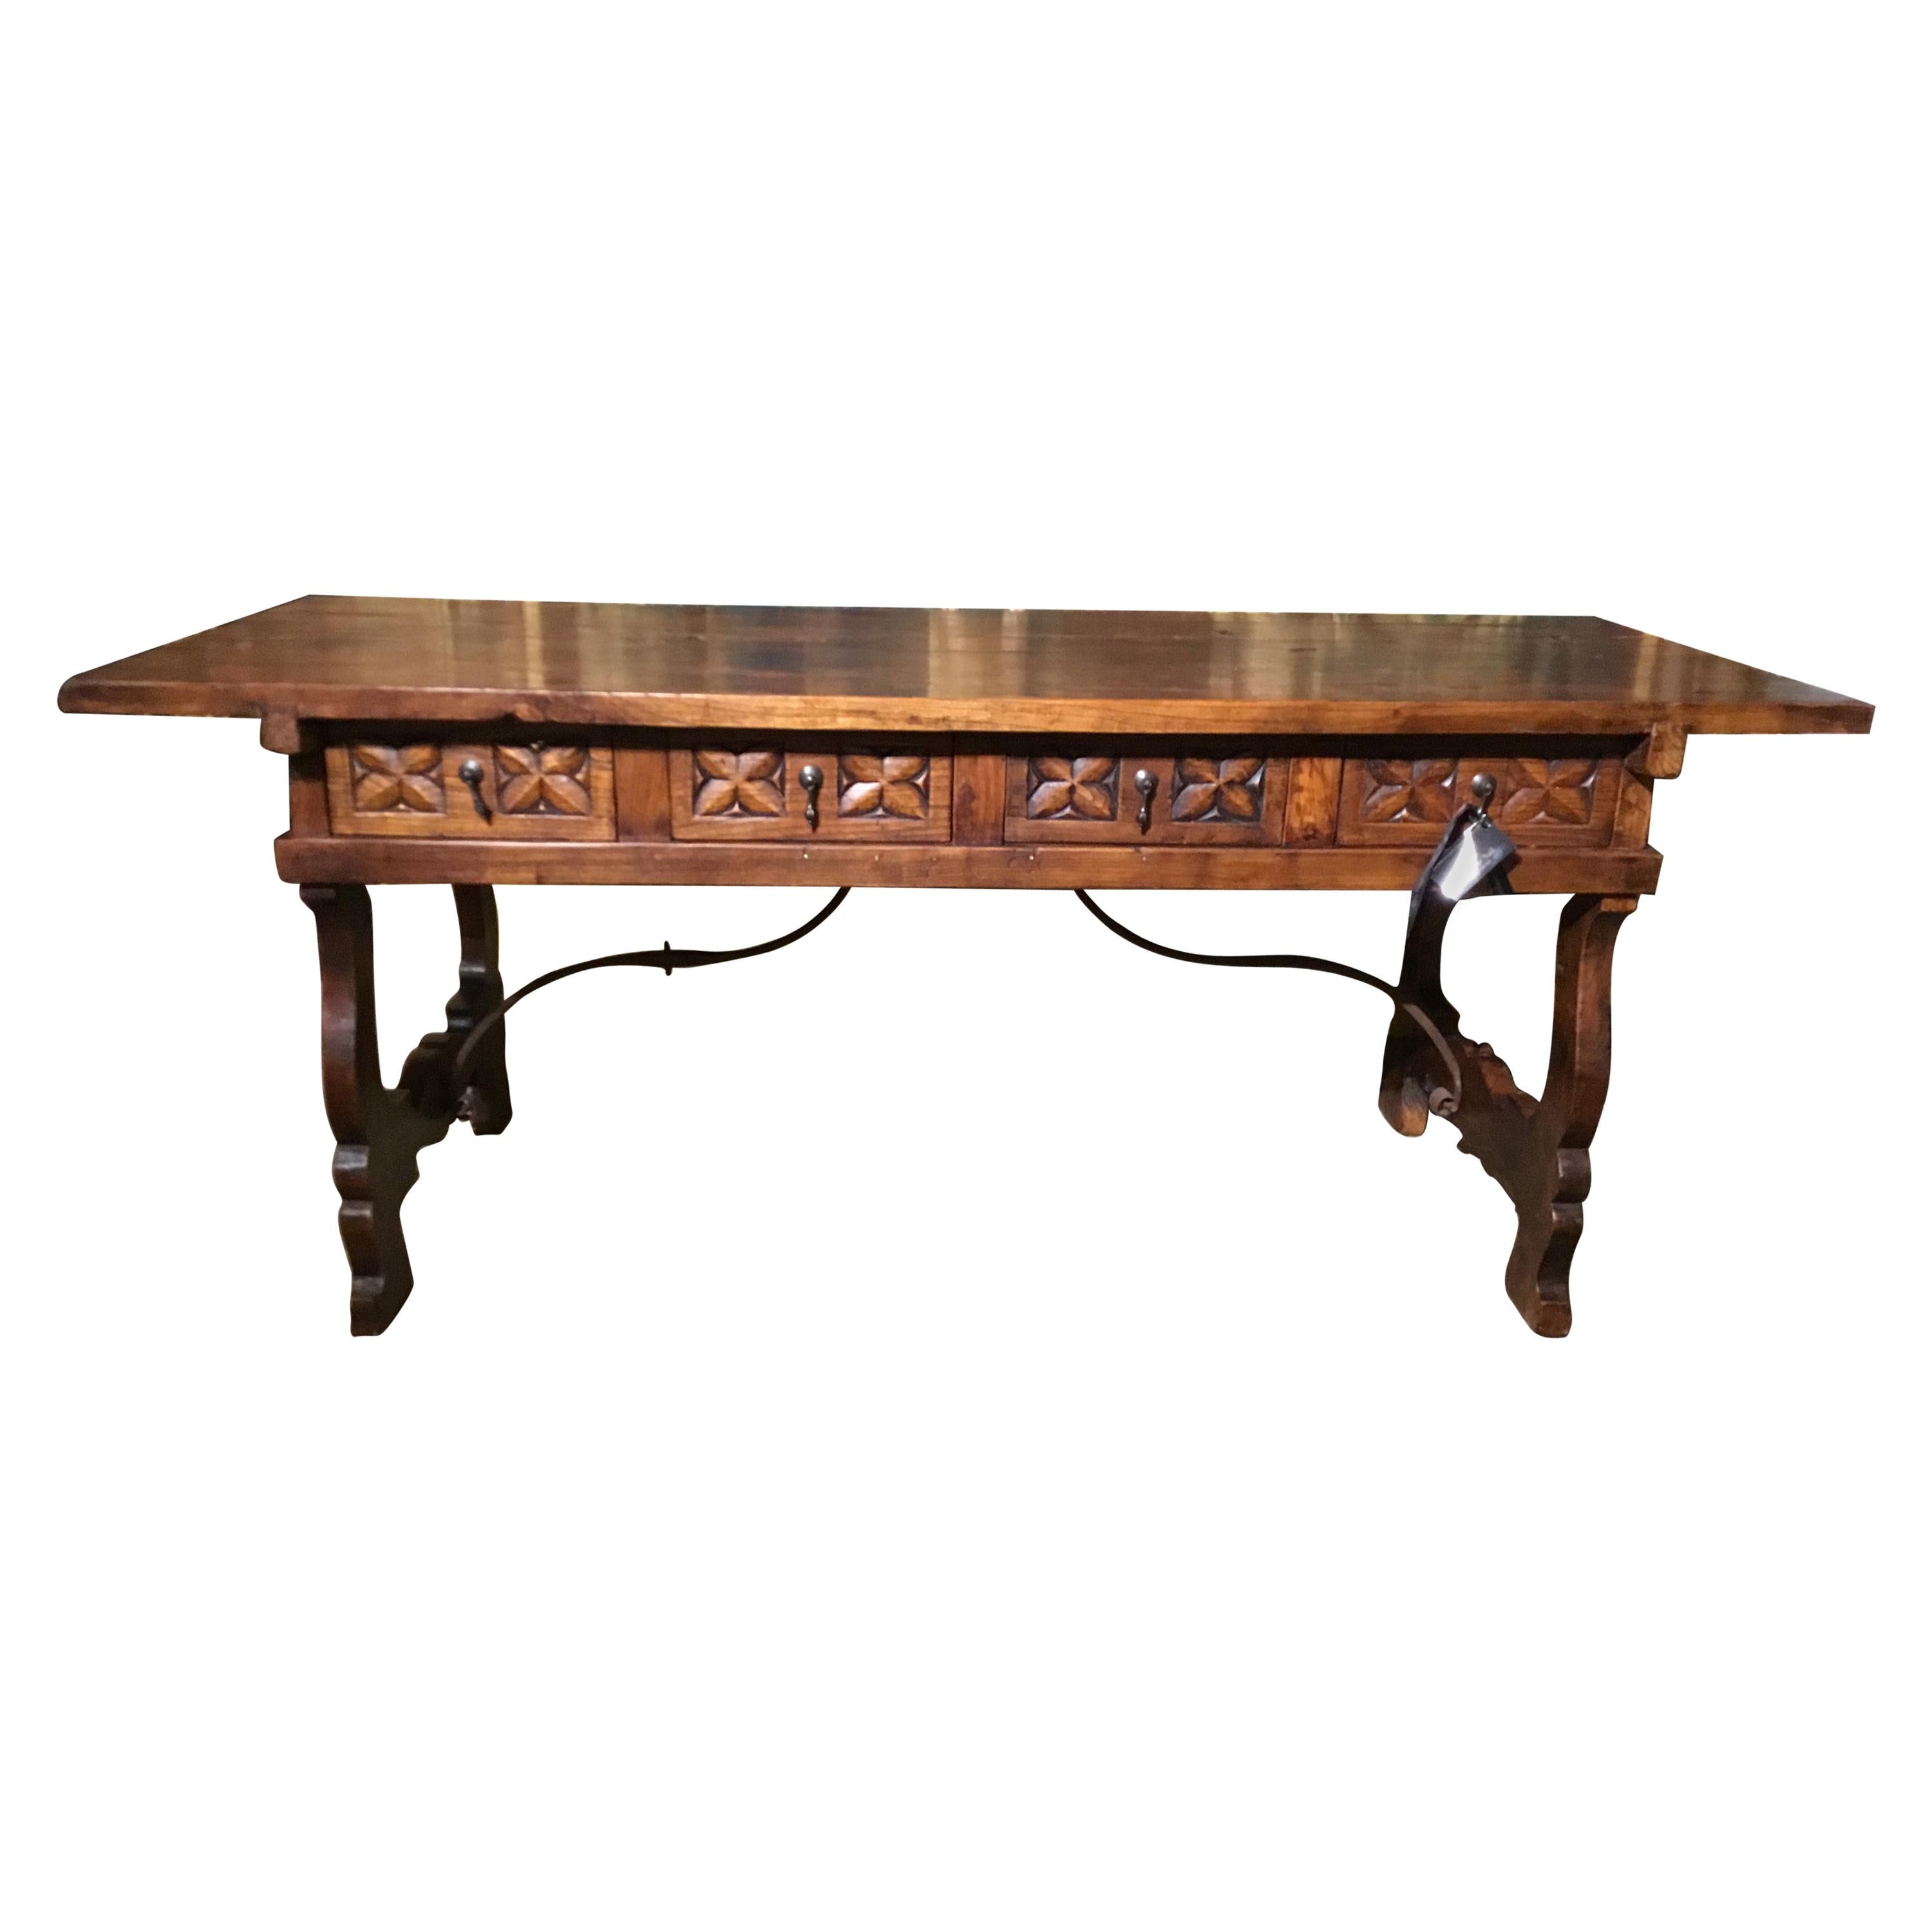 Rustic Desk or Library Table with Ox Bow Ends and Iron Stretcher below